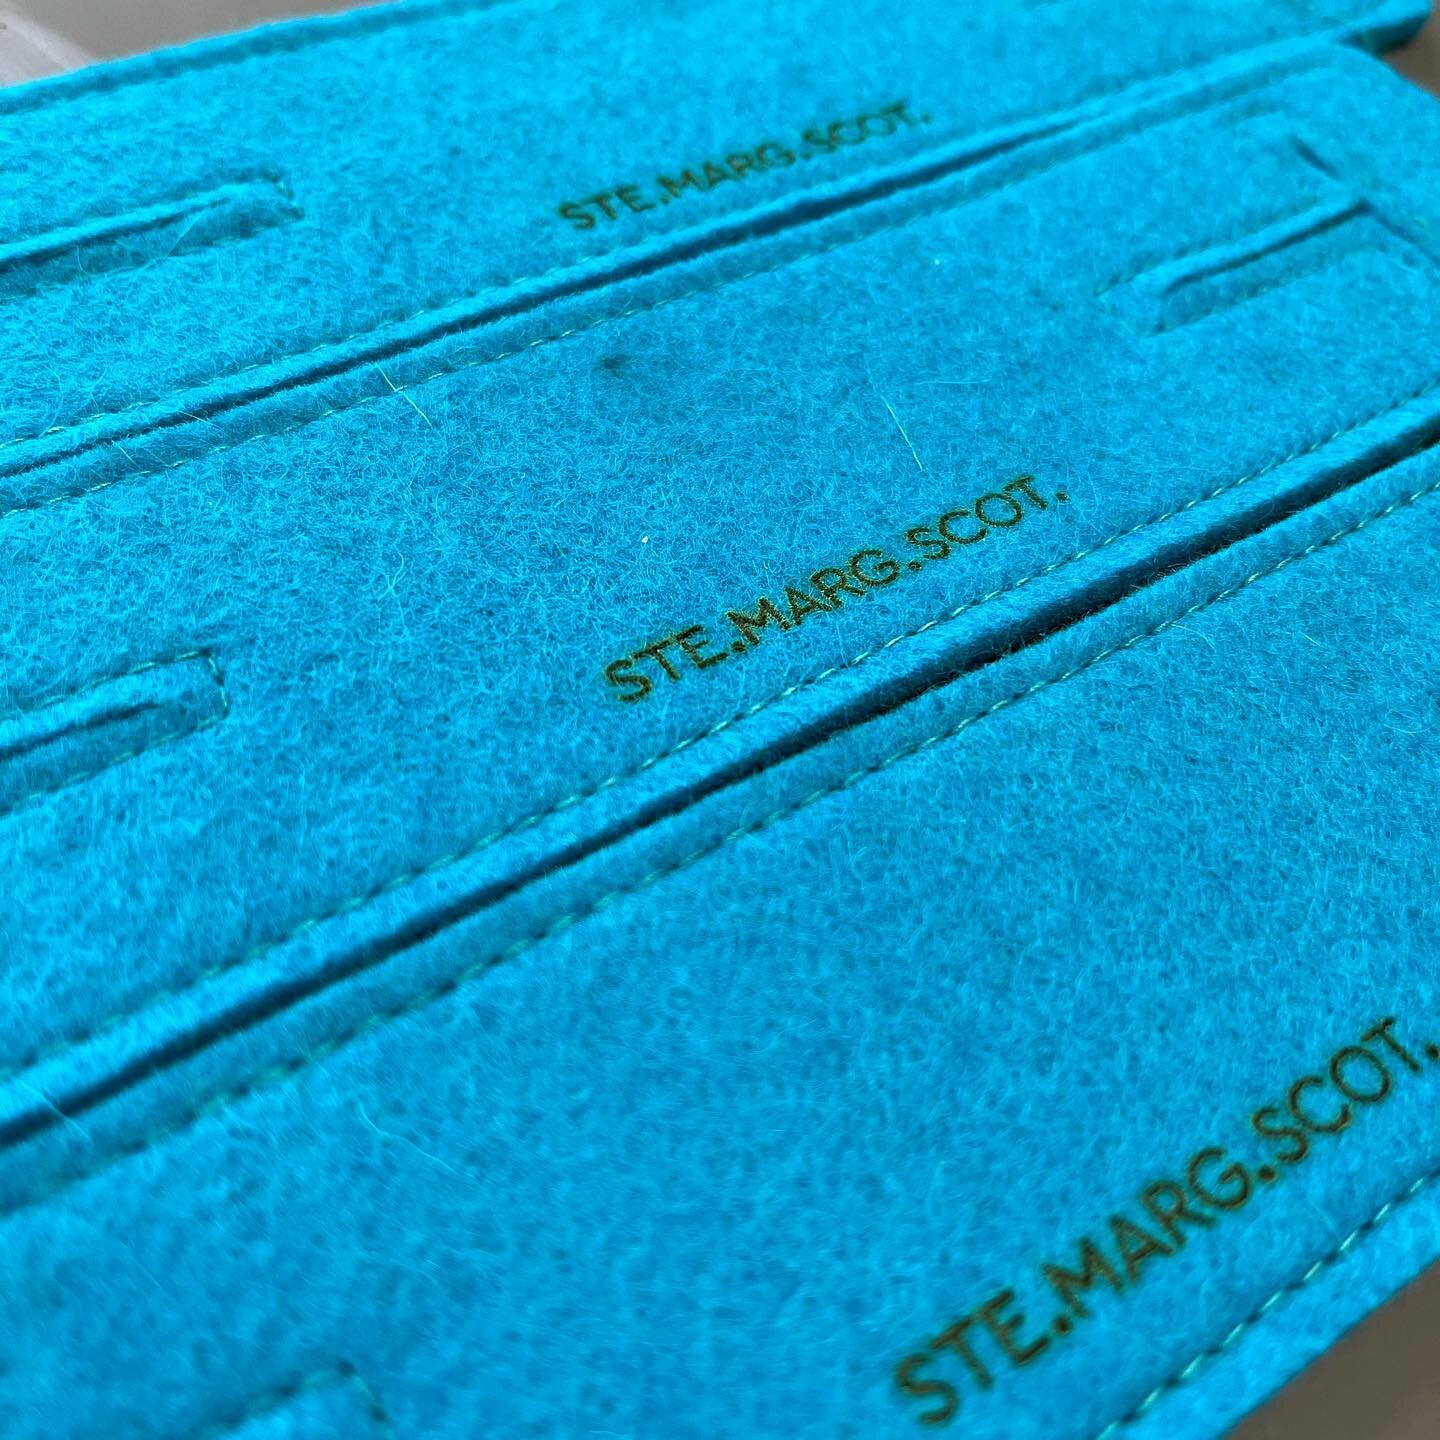 We started working with the SteMargScot team last year, and it&rsquo;s been so exciting to see their line of coats launch this month. We&rsquo;re proud to be part of their local, diverse, ethical supply chain partners 💜💙💛💚🧡

#madeincanada #madei